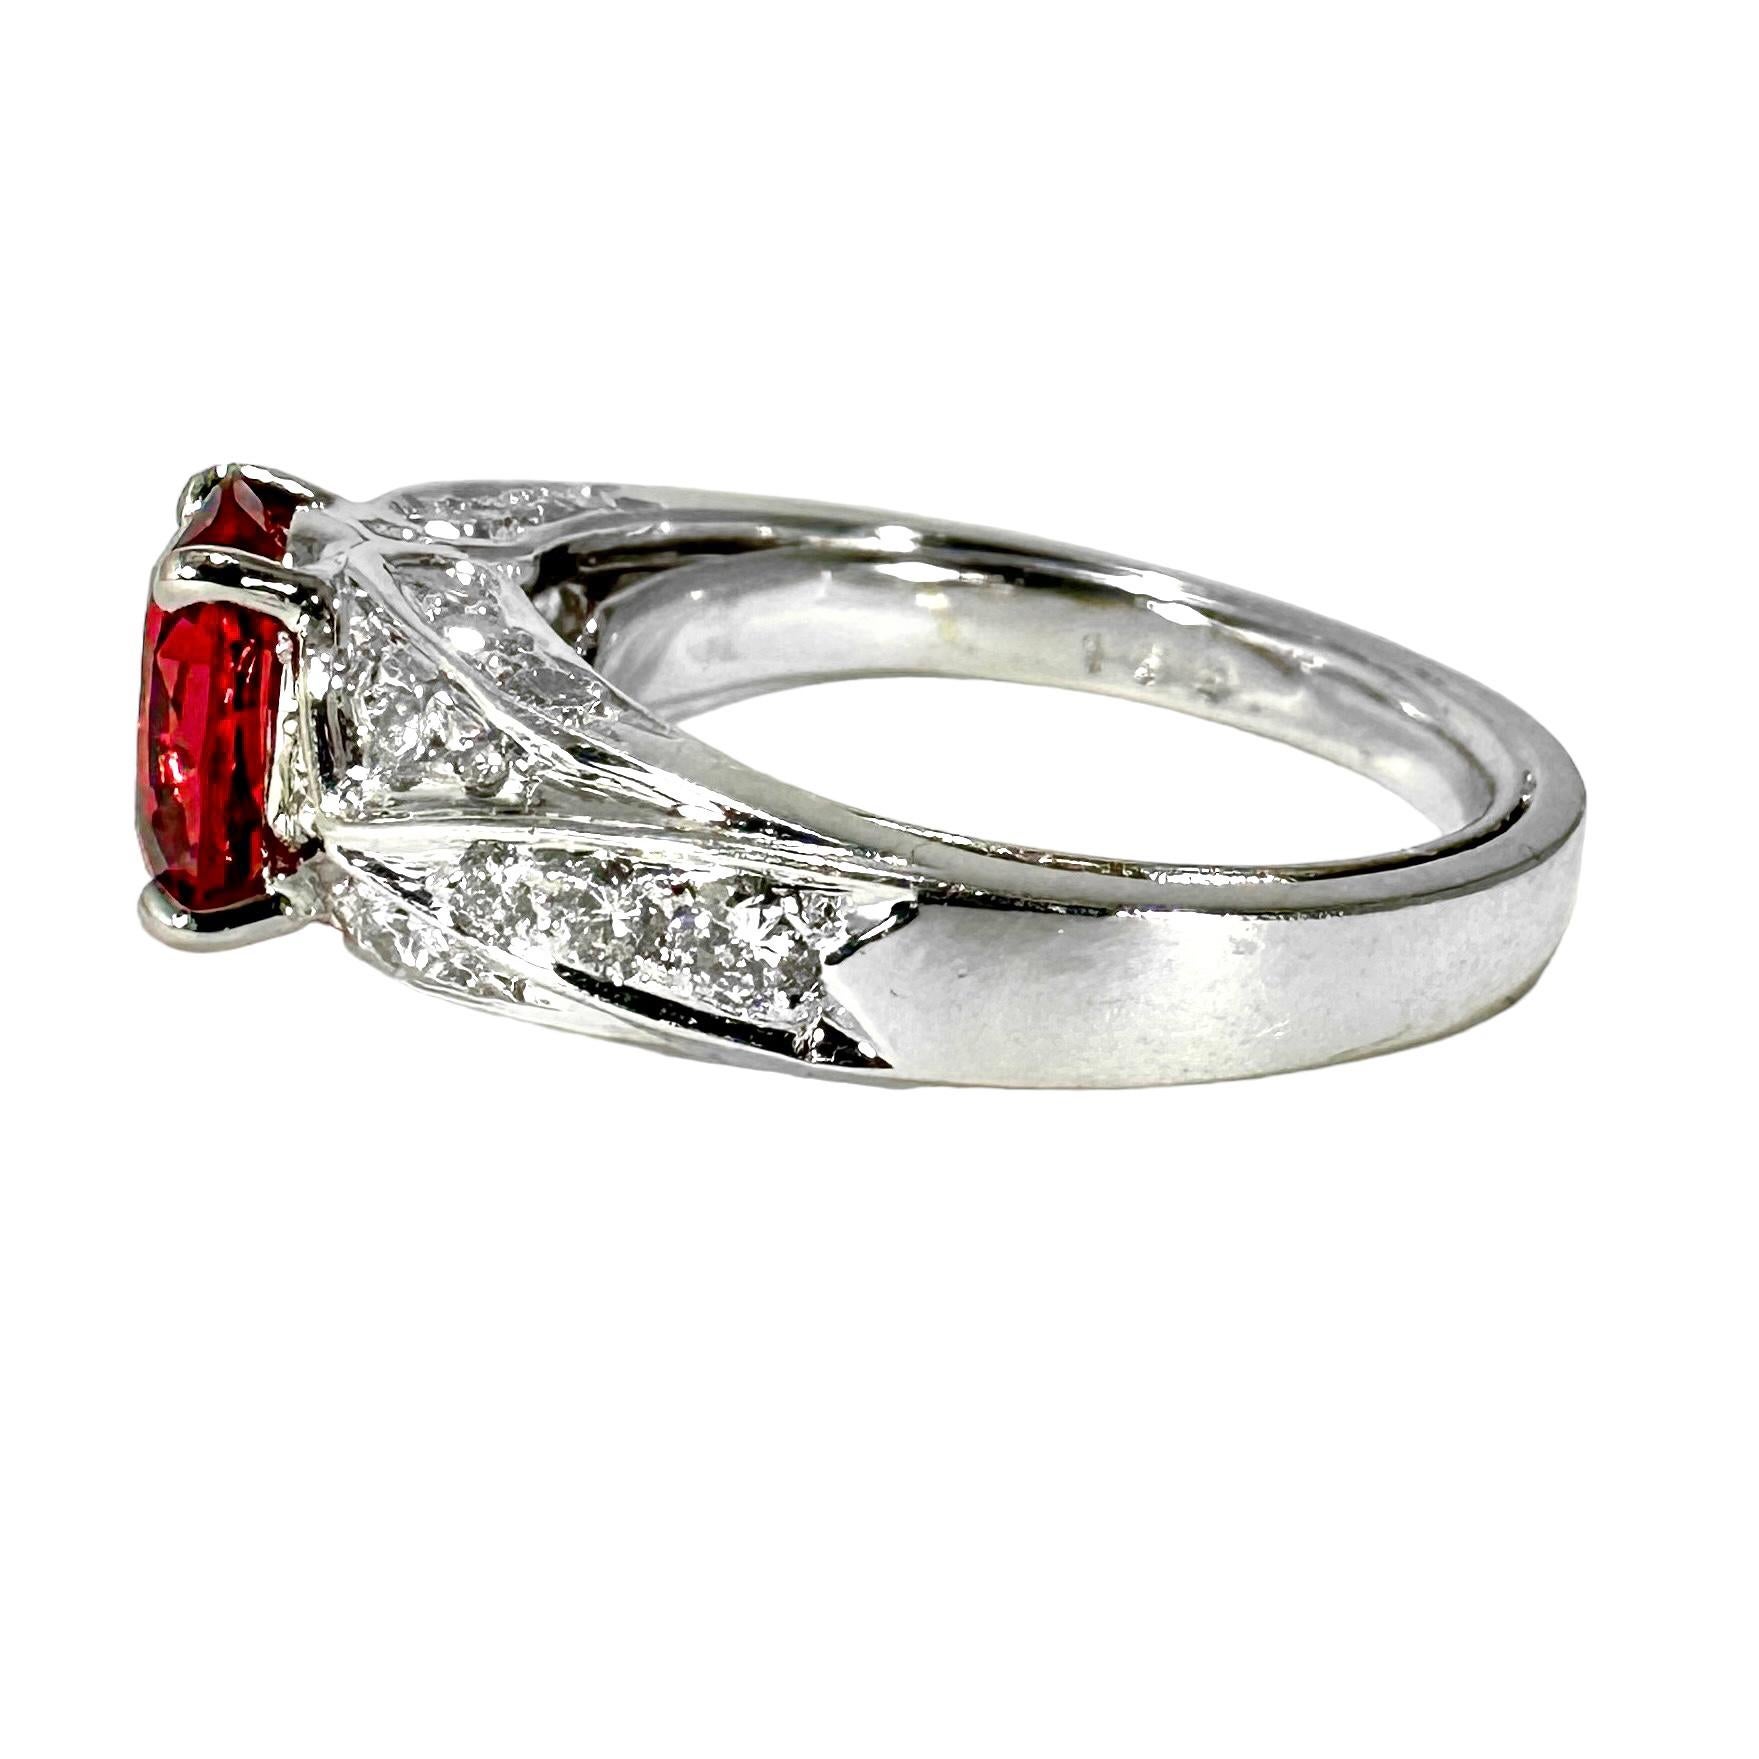 Women's Vivid Oval Shaped Orangy-Red Burmese Spinel set in Platinum Ring with Diamonds